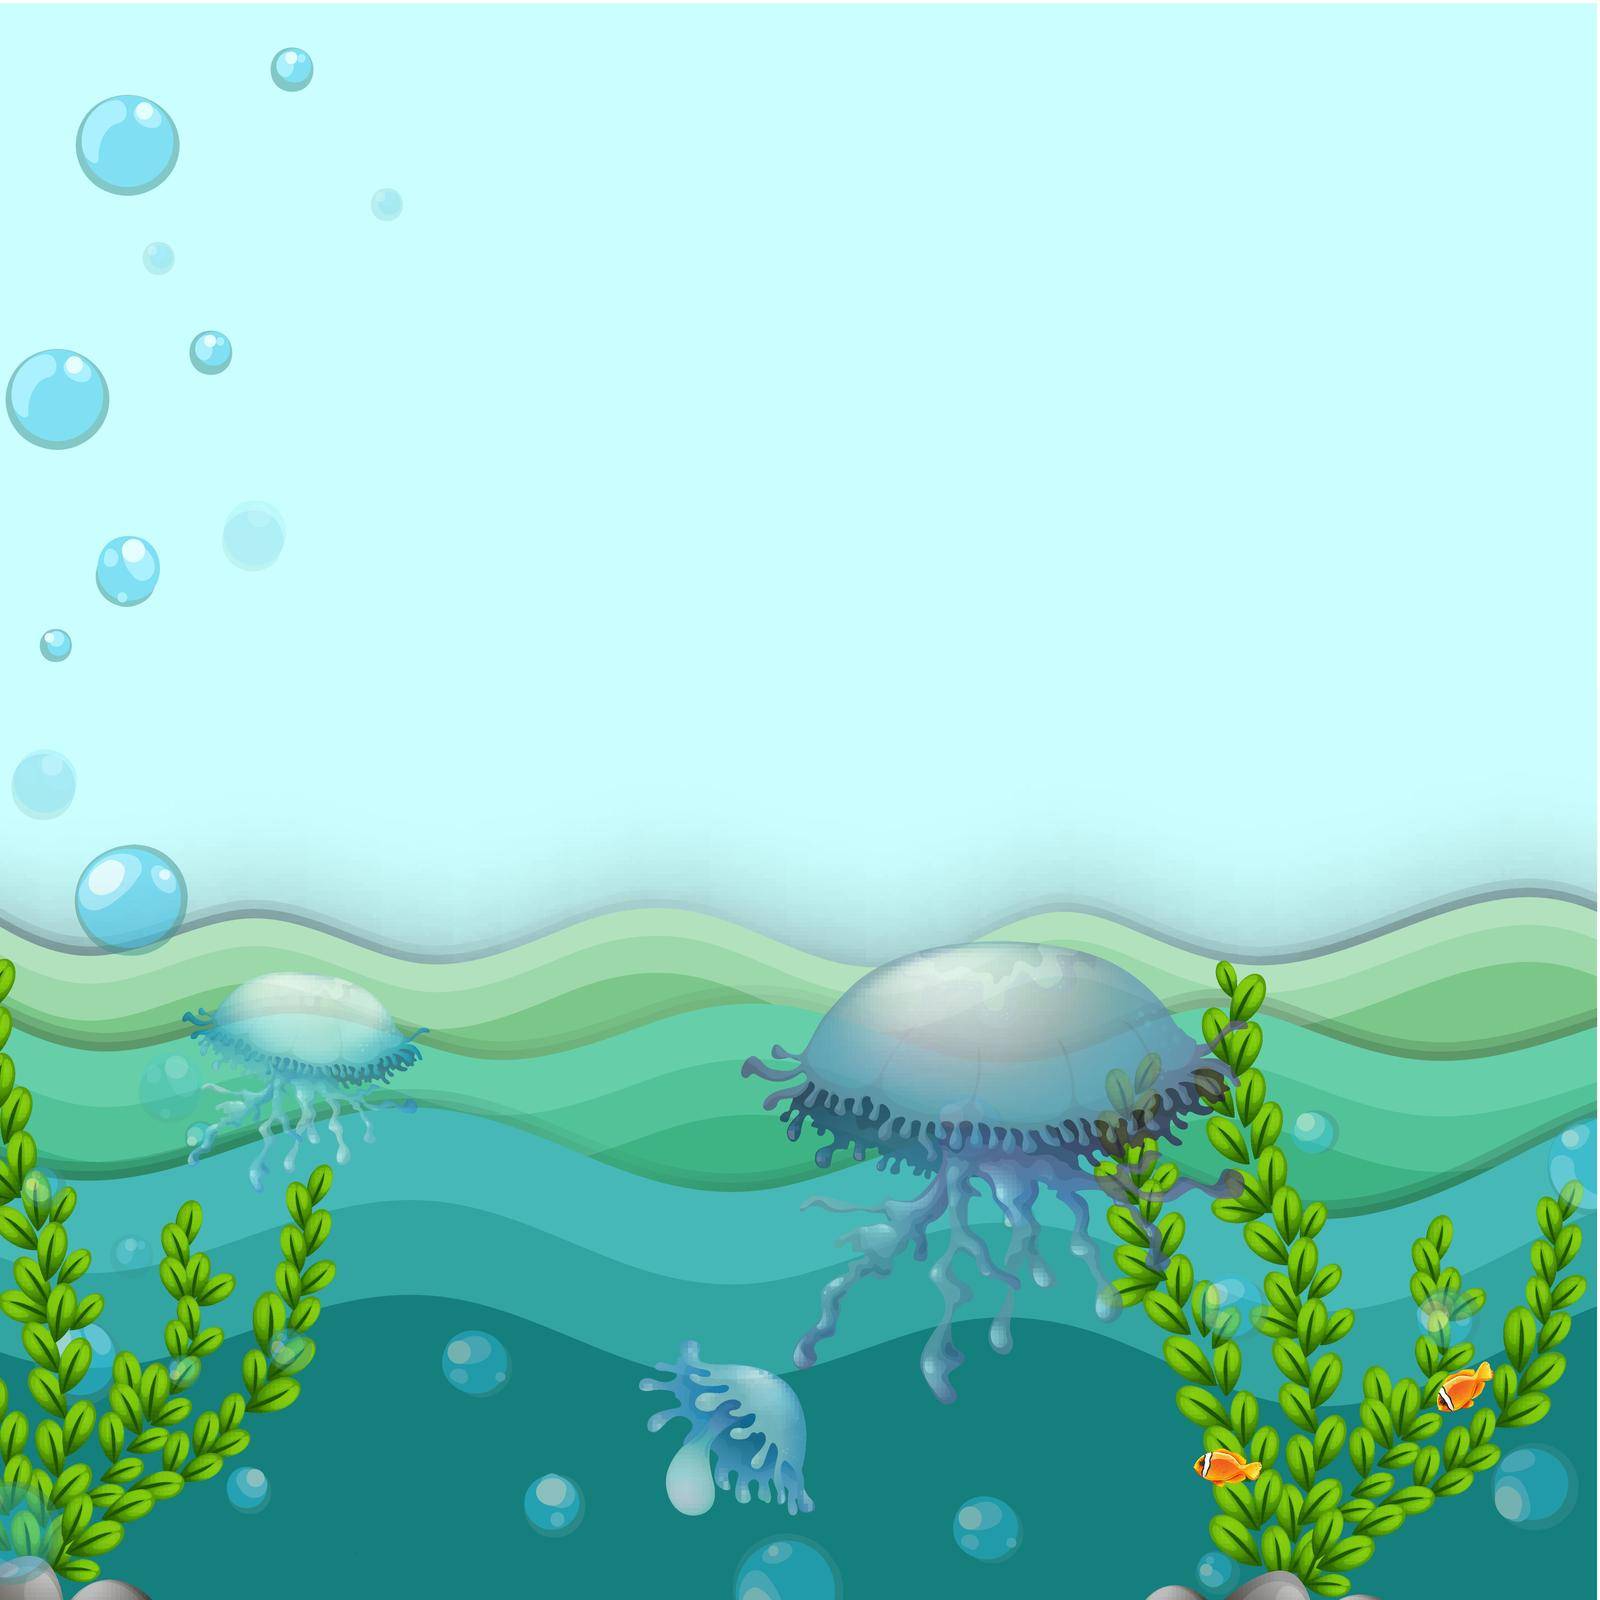 Illustration of the jellyfishes under the sea